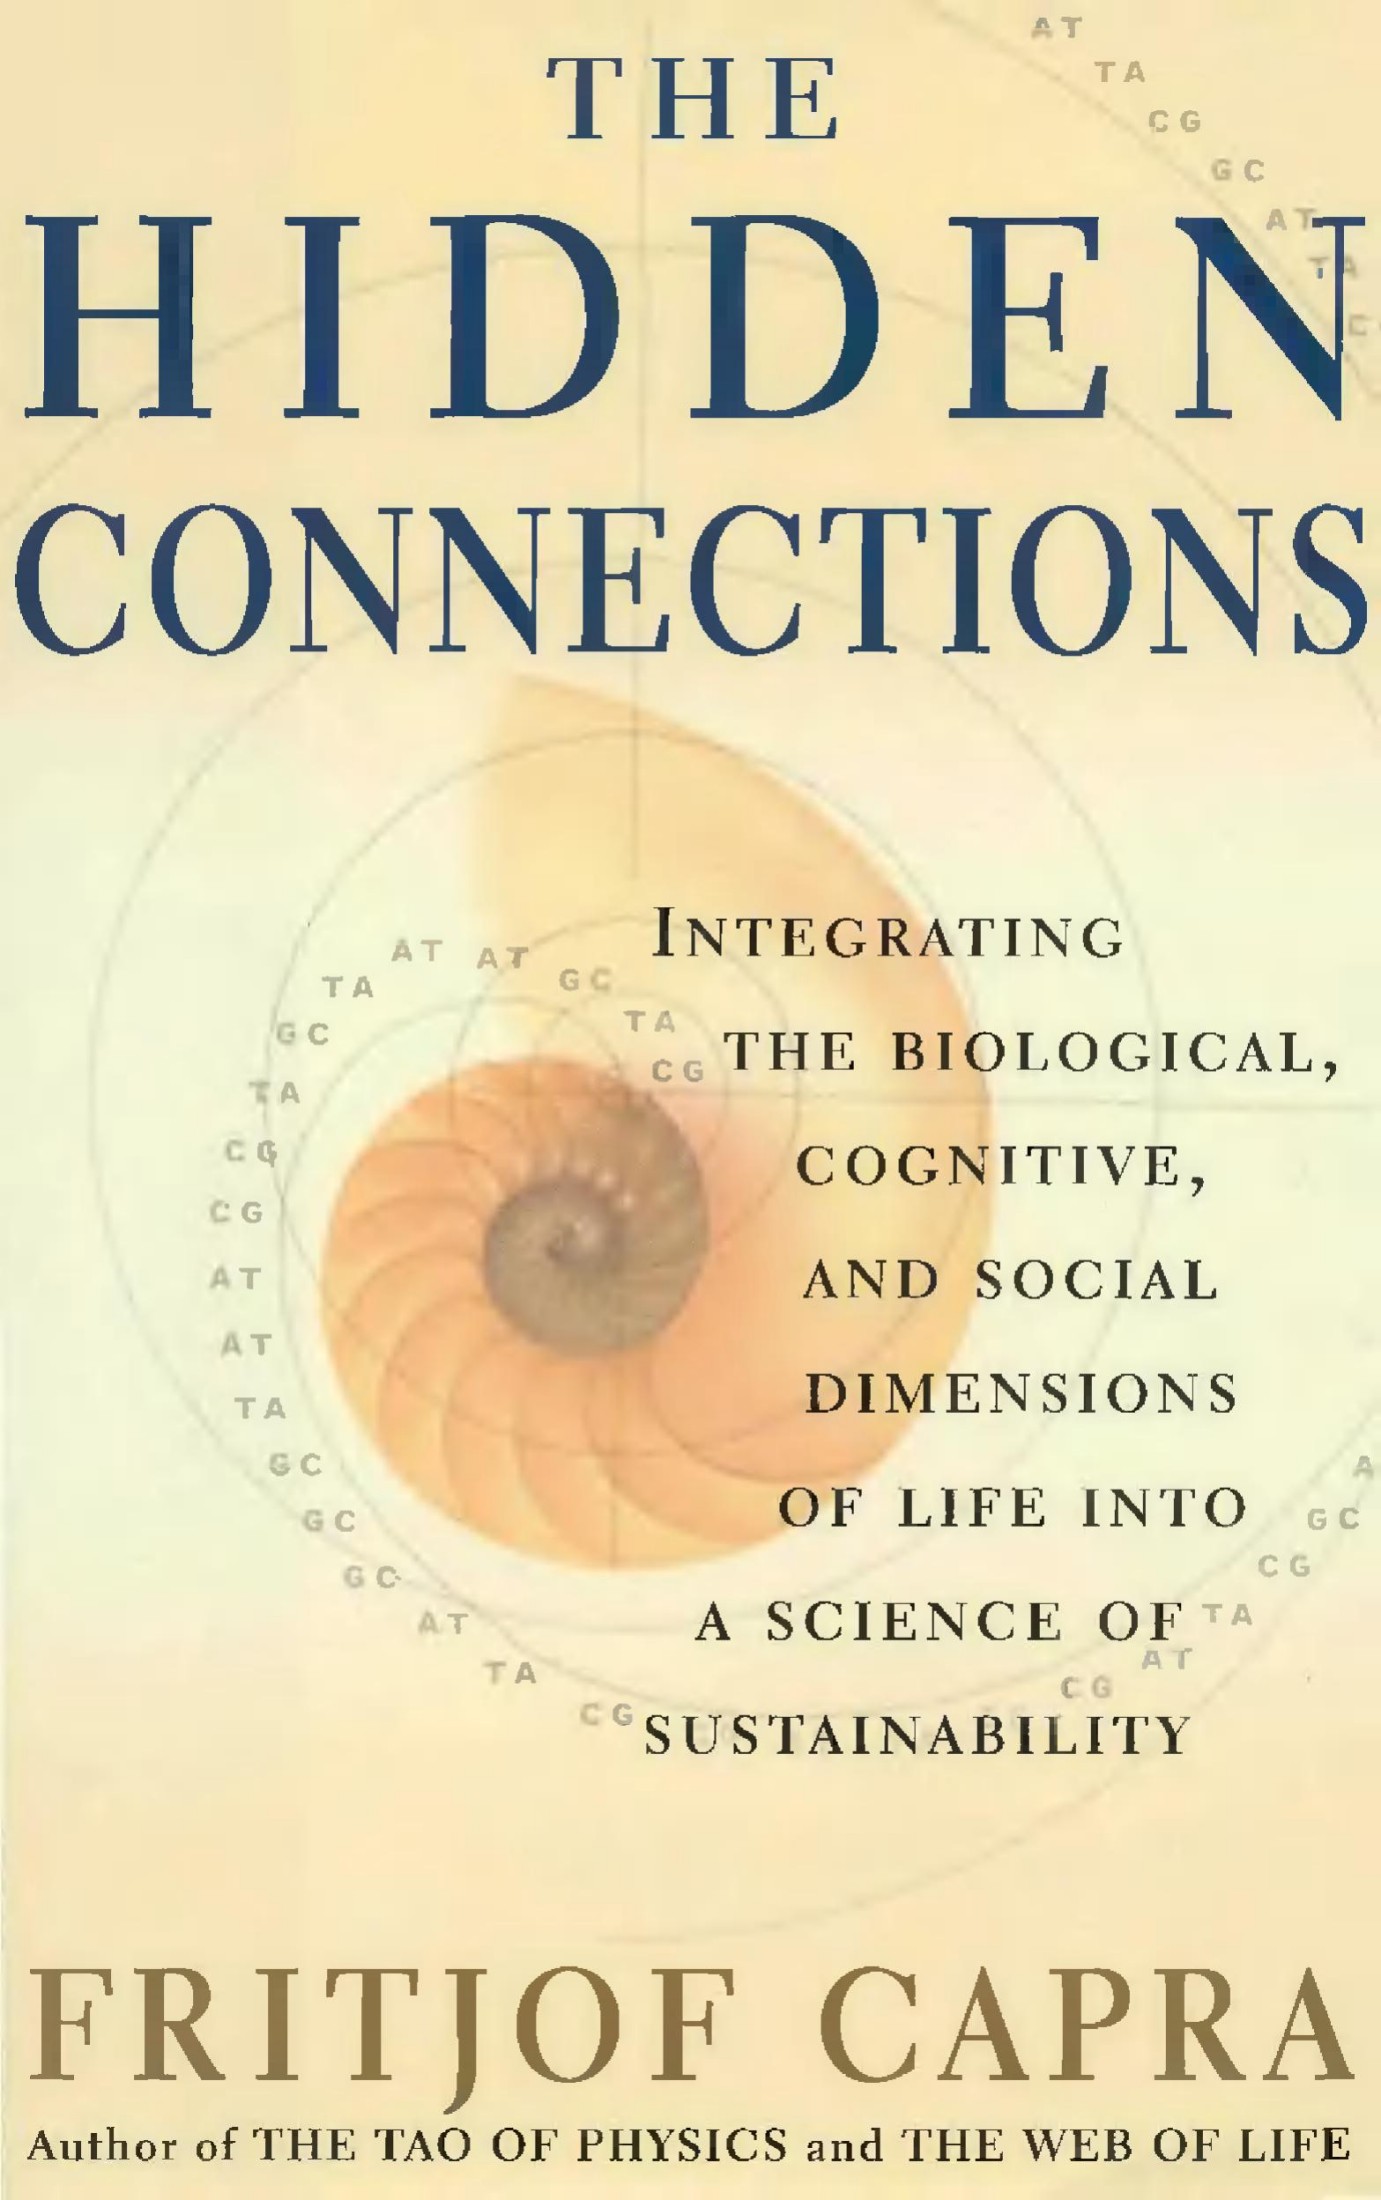 The Hidden Connections: Integrating the Biological, Cognitive, and Social Dimensions of Life Into a Science of Sustainability